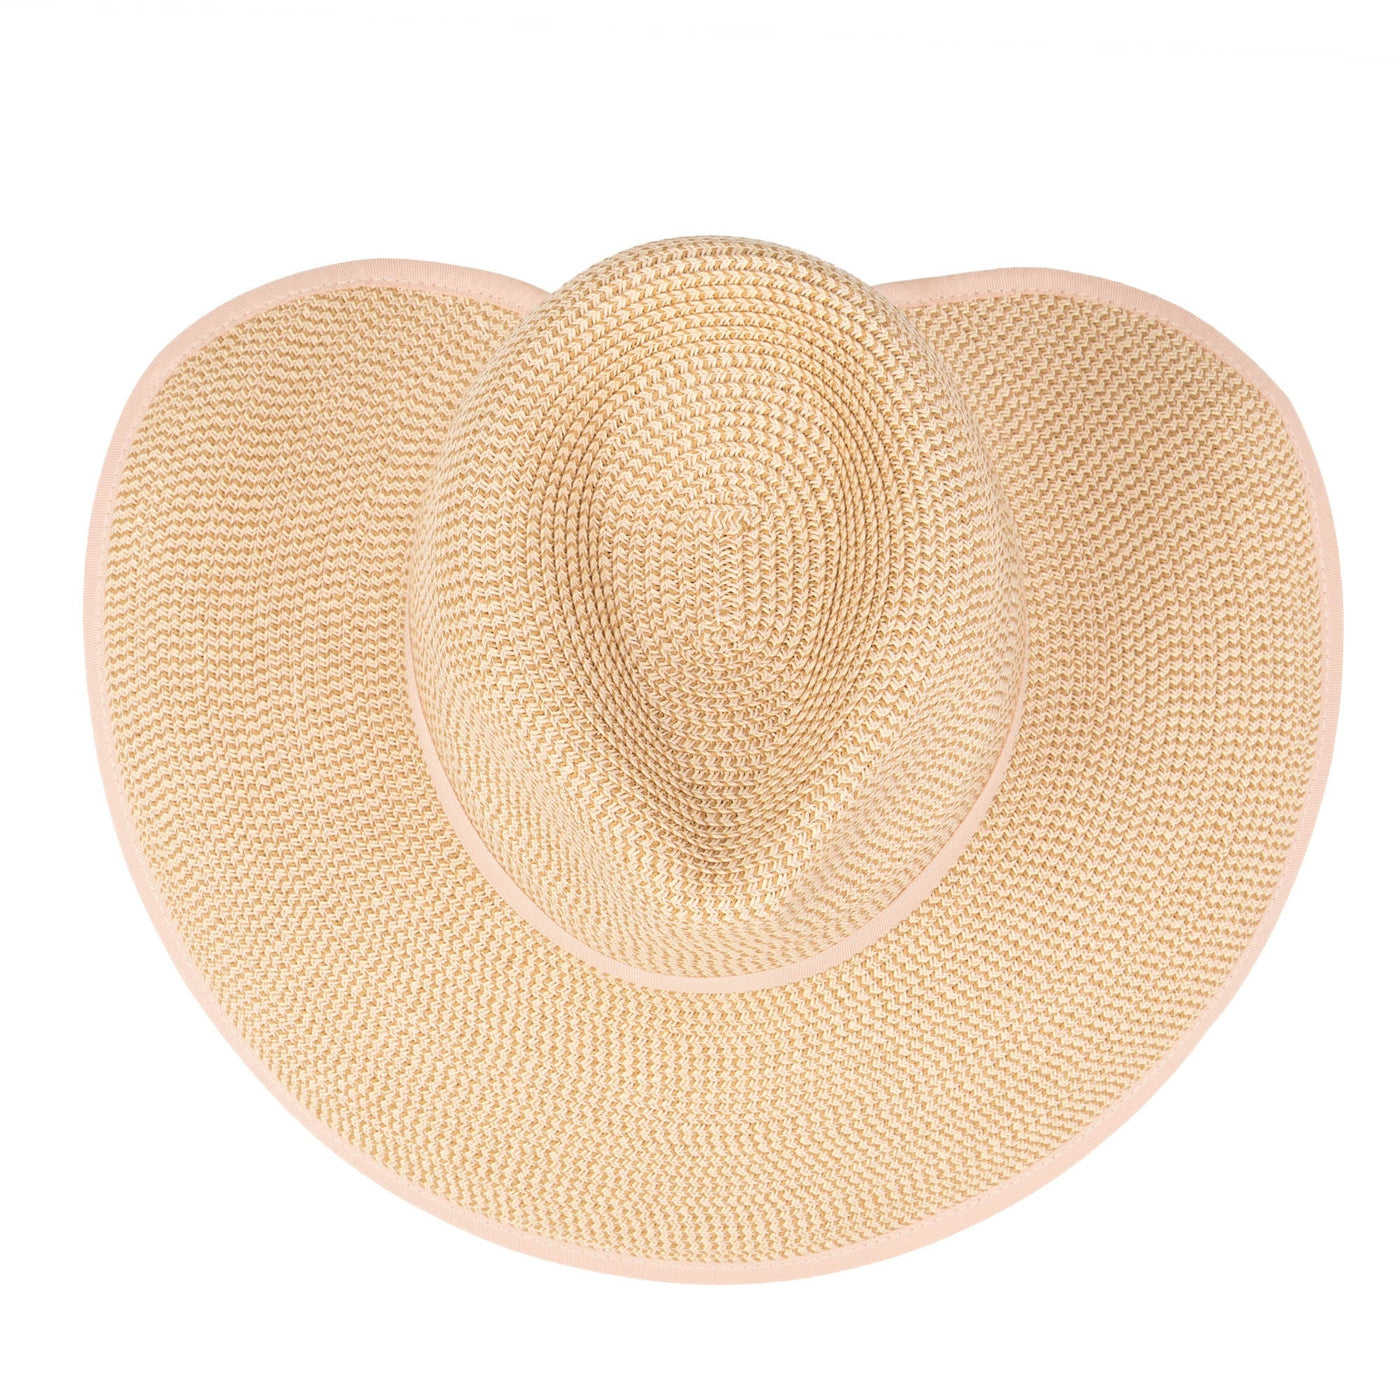 Everyday Face Saver - Women's Pinched Crown Sun Hat